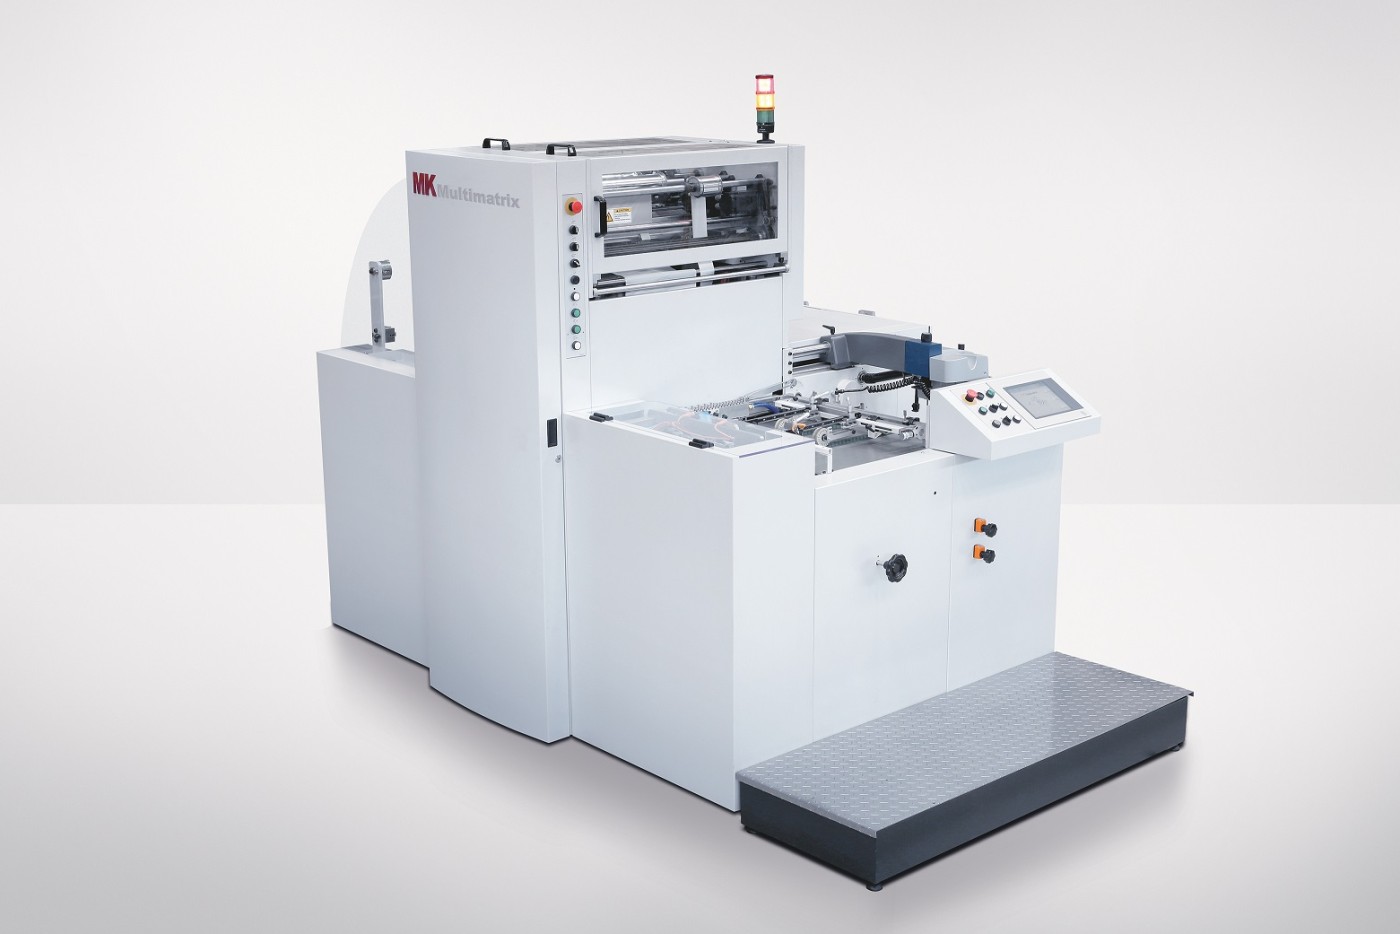 Heidelberg offering innovative solutions for greater productivity and user-friendliness in postpress